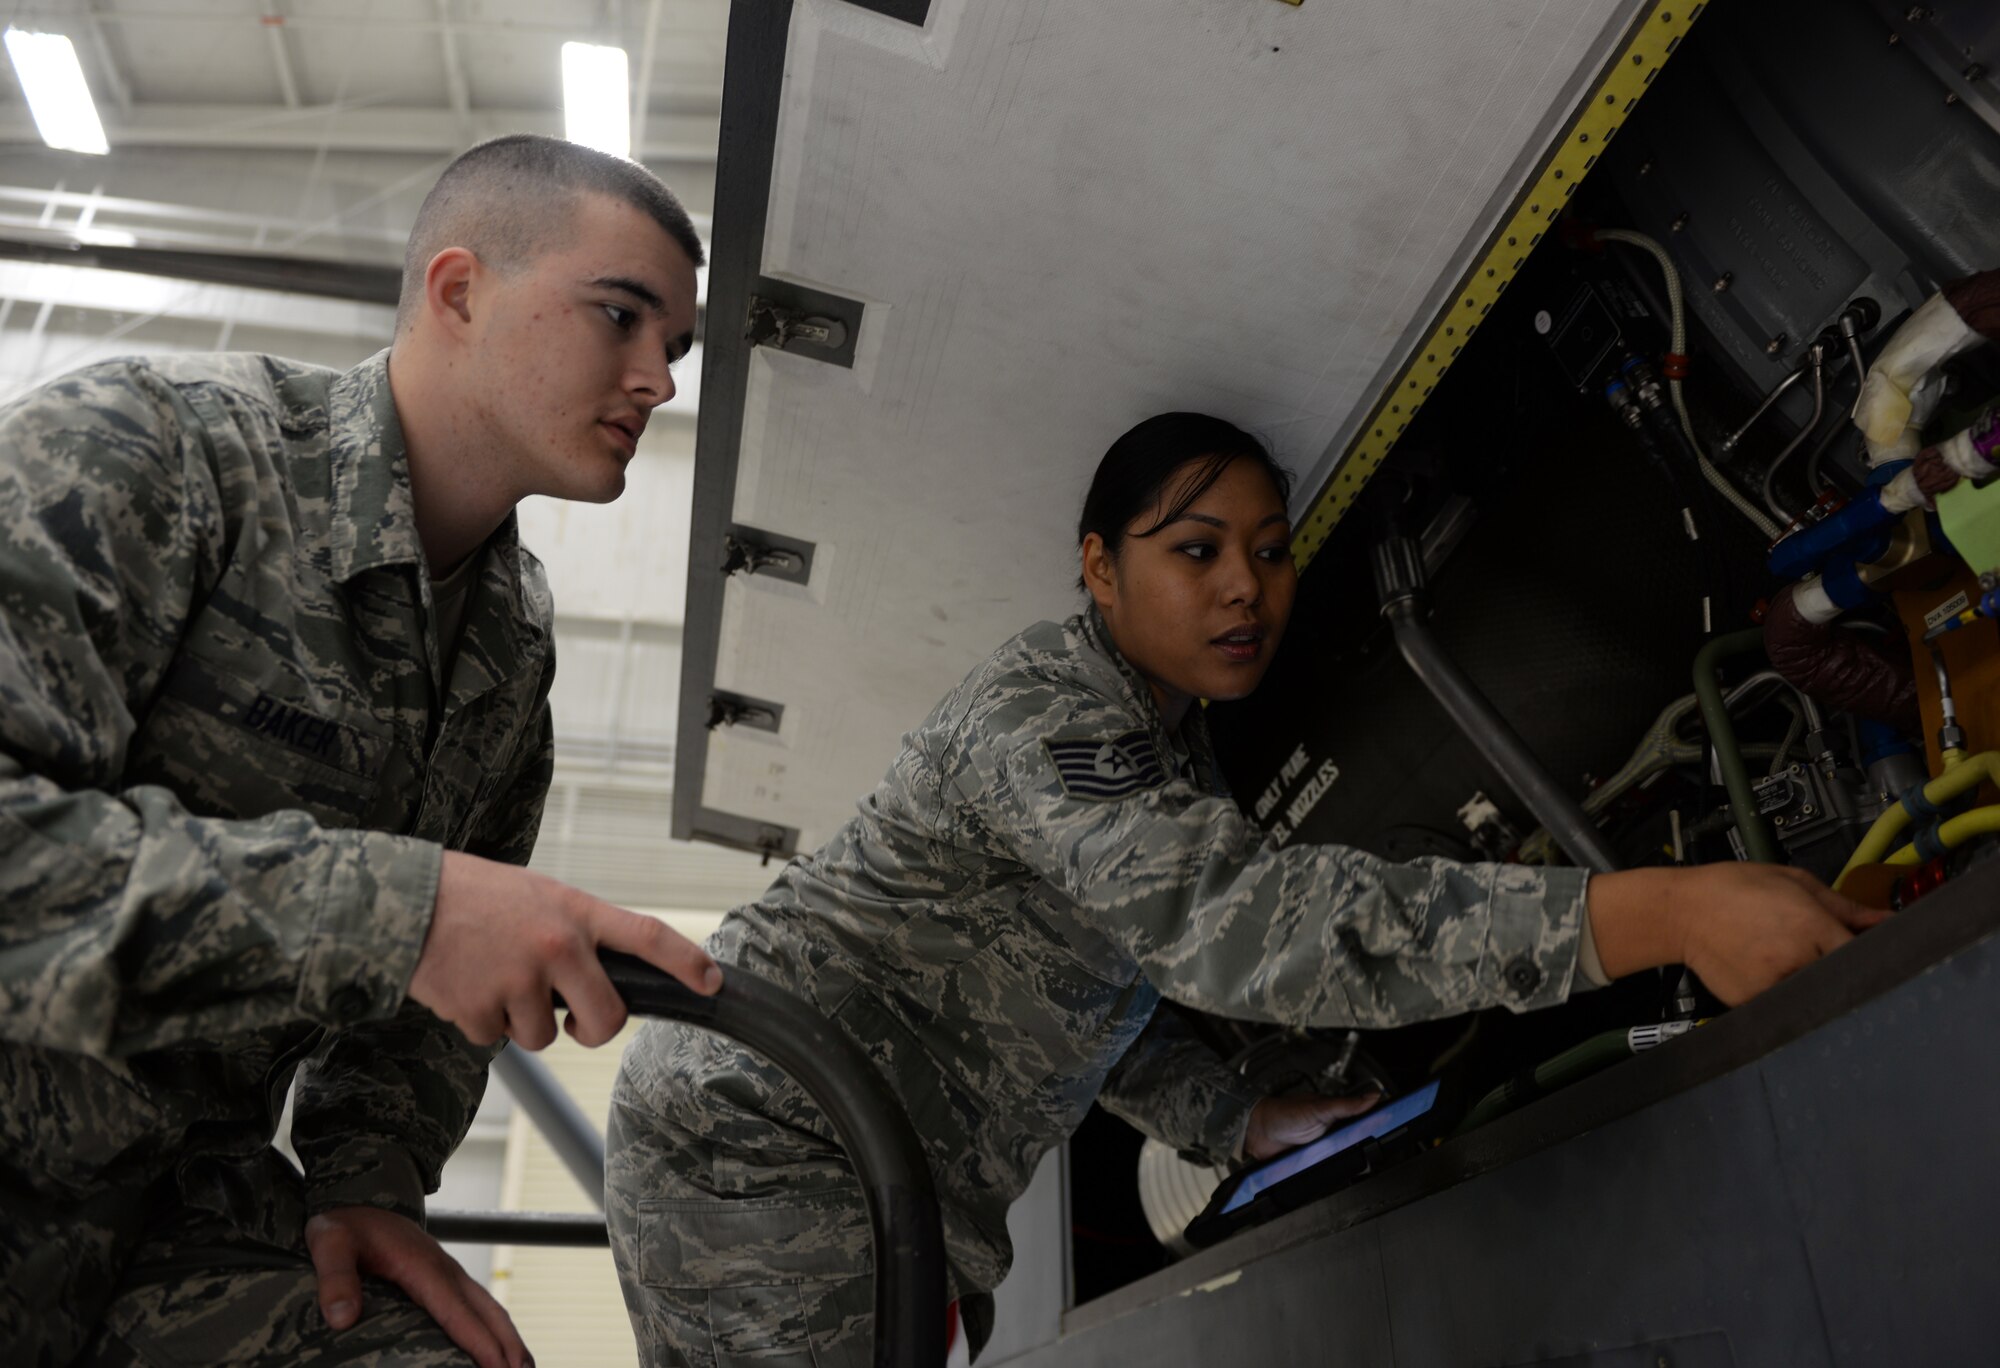 Tech. Sgt. Maureen Madamba (right), 372nd Training Squadron Detachment 21 maintenance instructor, instructs Airman Basic Lain Baker, 372nd TRS Detachment 21 student, how to properly inspect interior components of a RQ-4 Global Hawk Jan. 20, 2015, at Beale Air Force Base, Calif. Madamba is tasked with teaching the first class of the RQ-4 remotely piloted aircraft maintenance course. (U.S. Air Force photo by Senior Airman Bobby Cummings/Released)